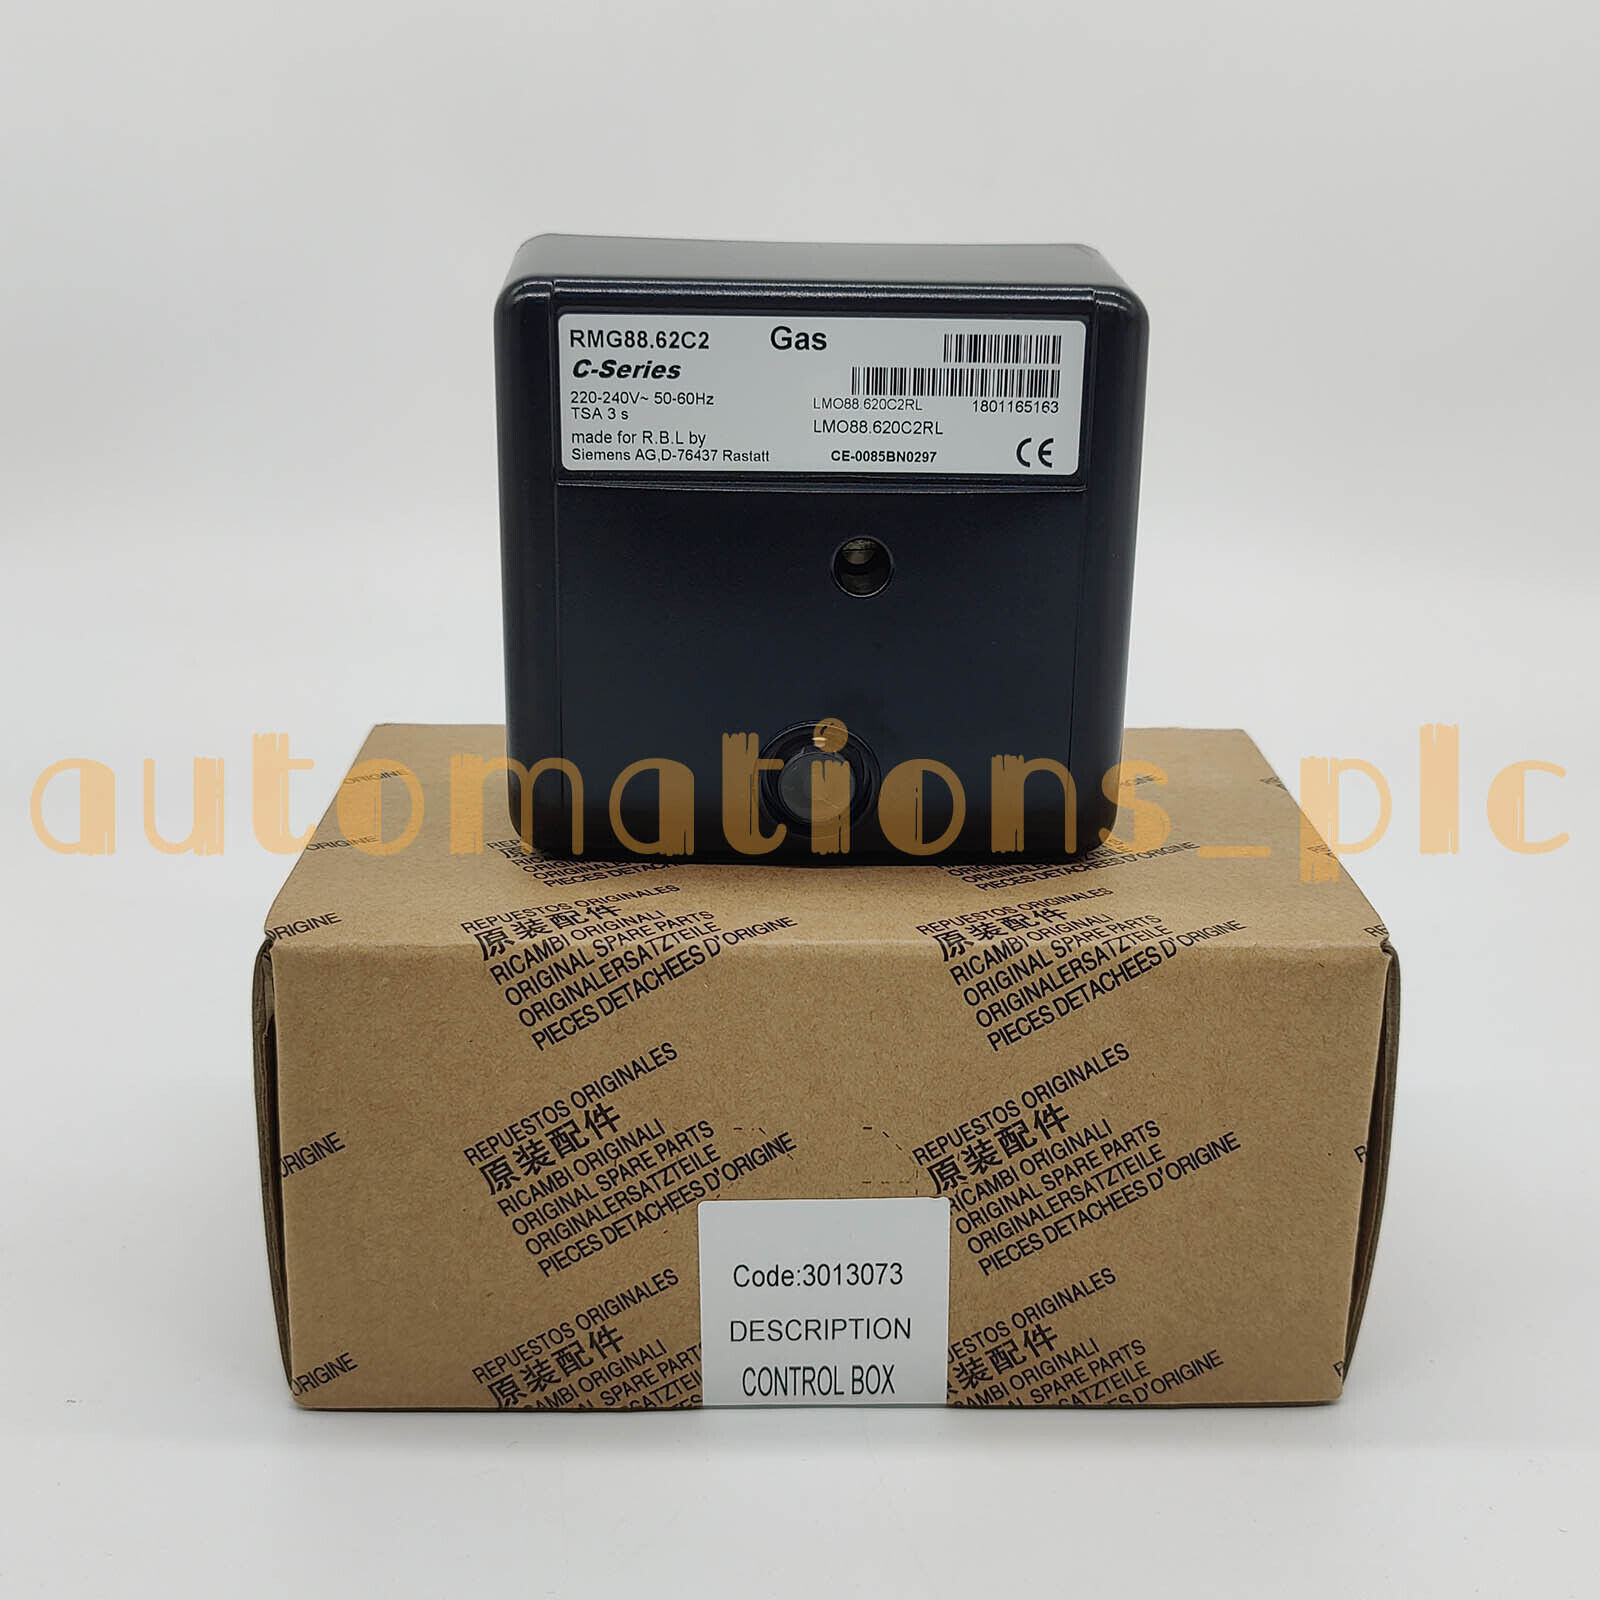 New in box Siemens RMG88.62C2 Electronic Ignition Control Fast Delivery &AP